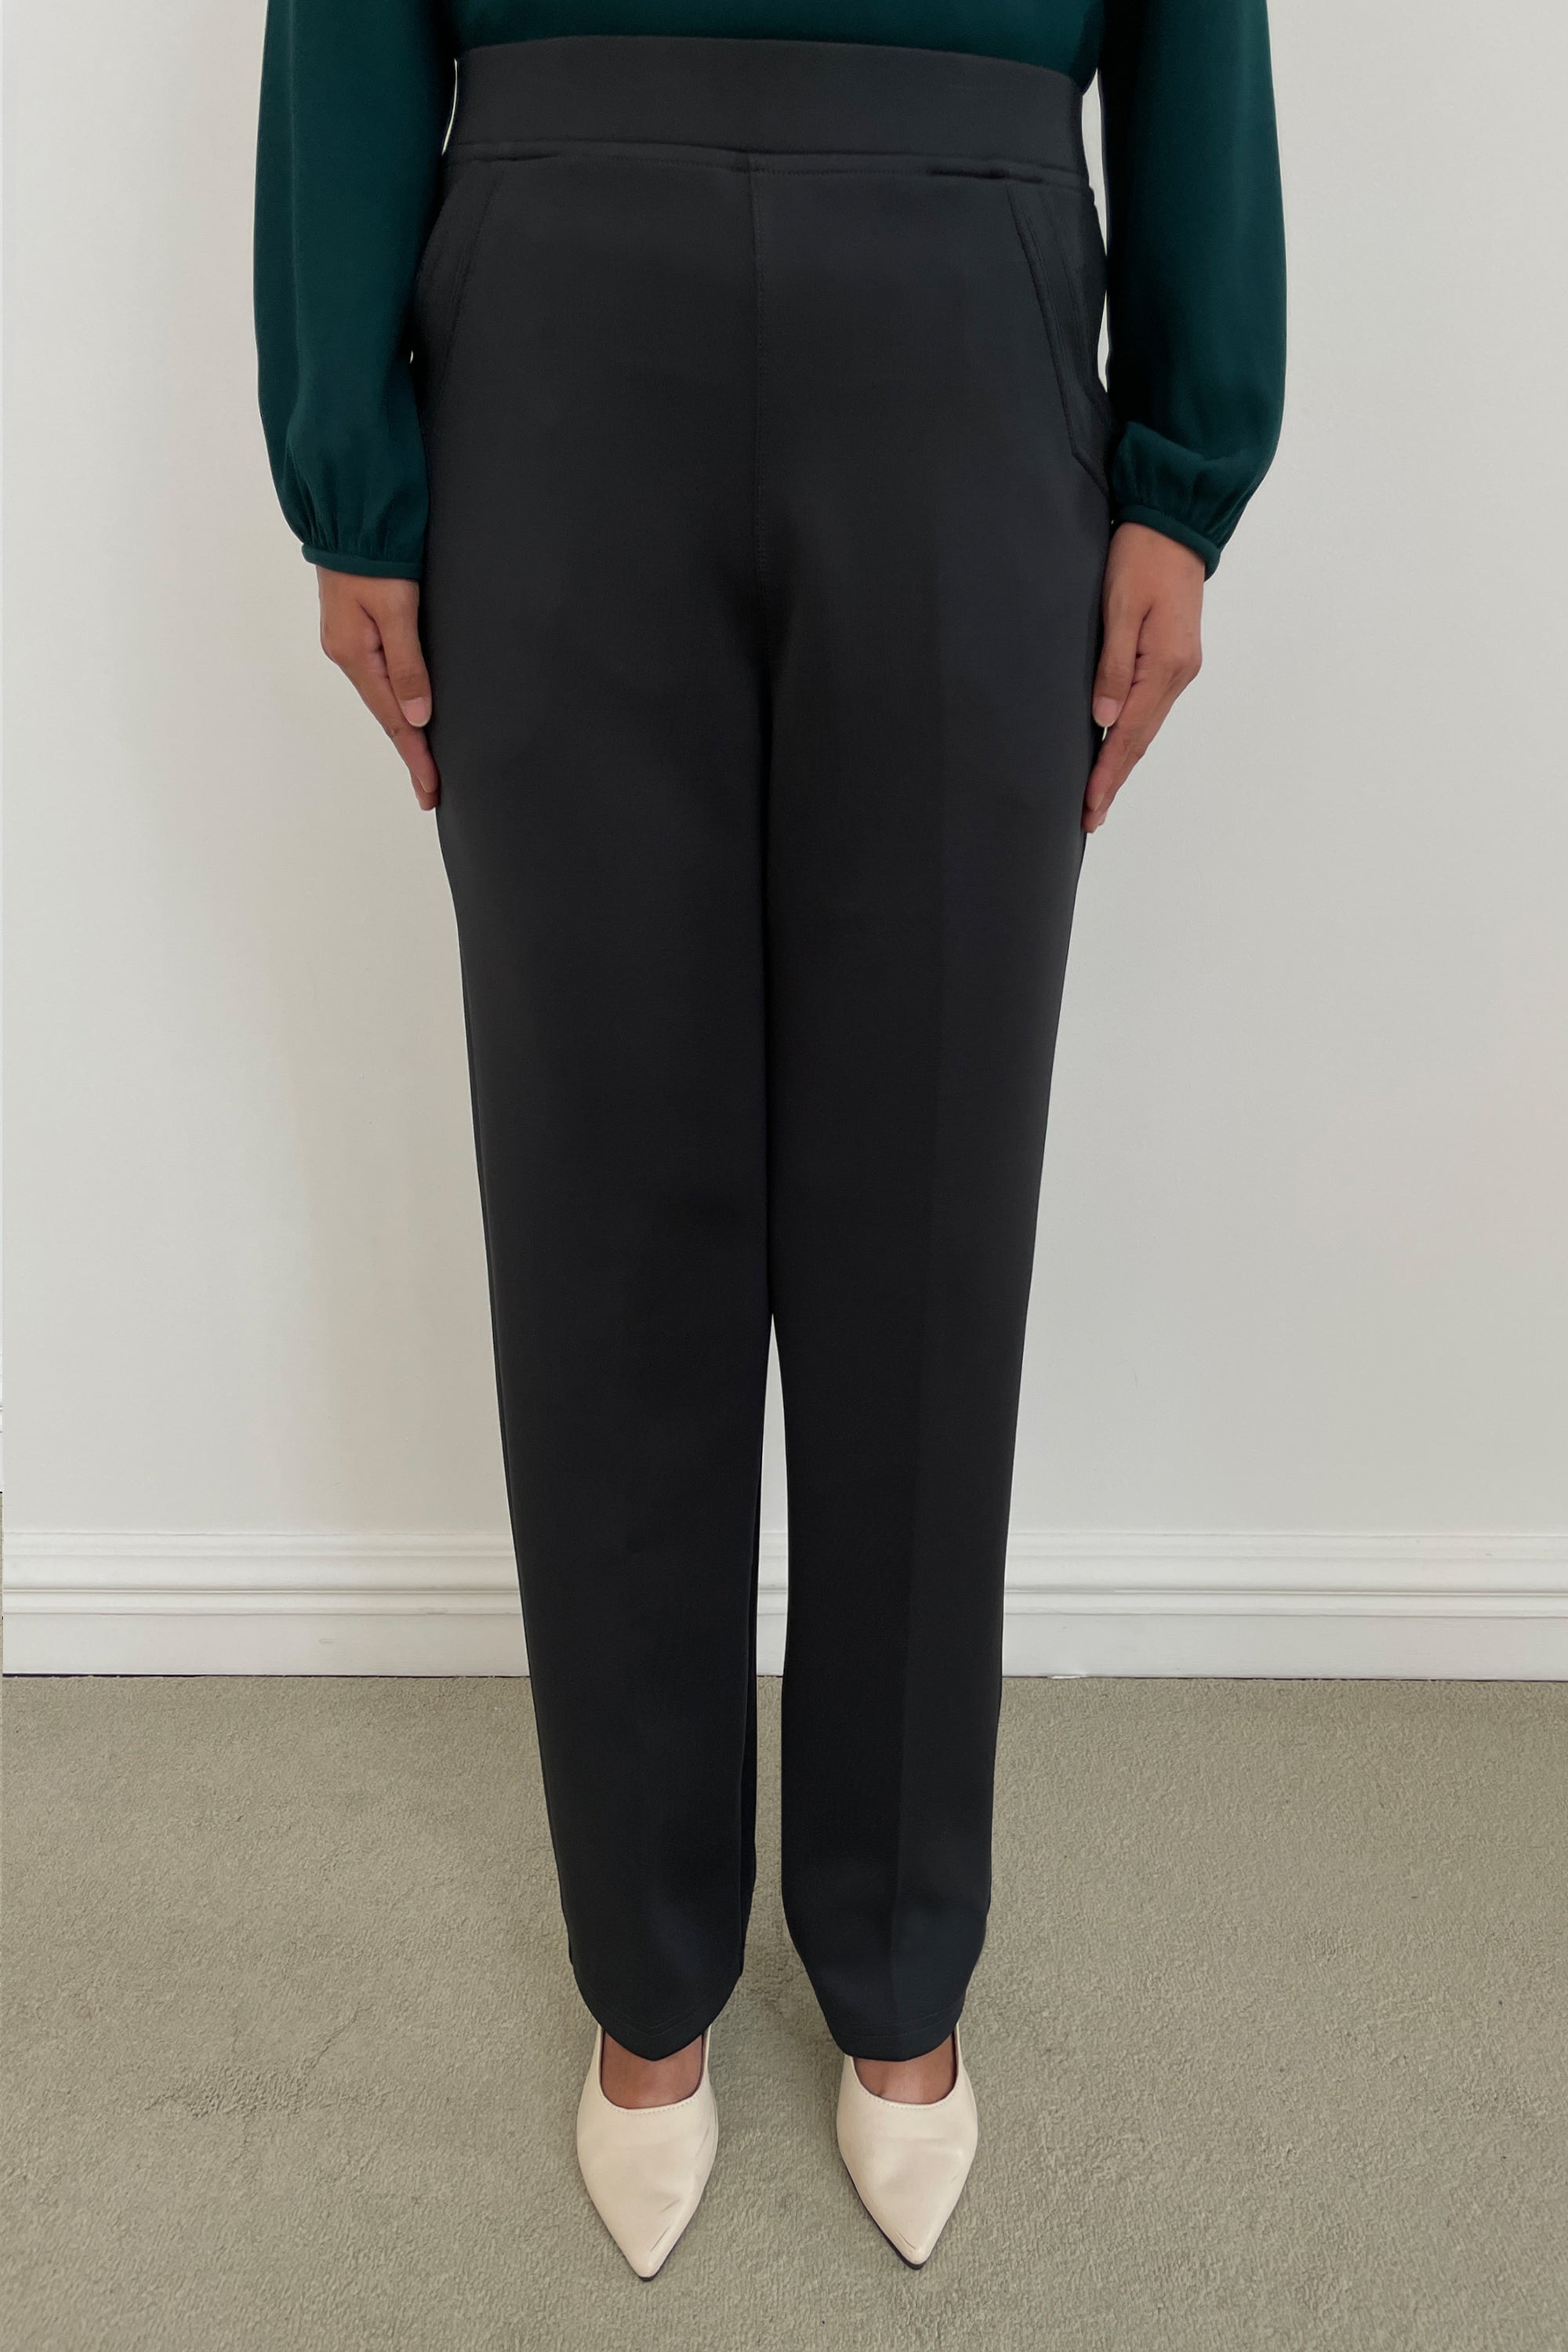 Stretchable Office Pants without Zipper - Grey